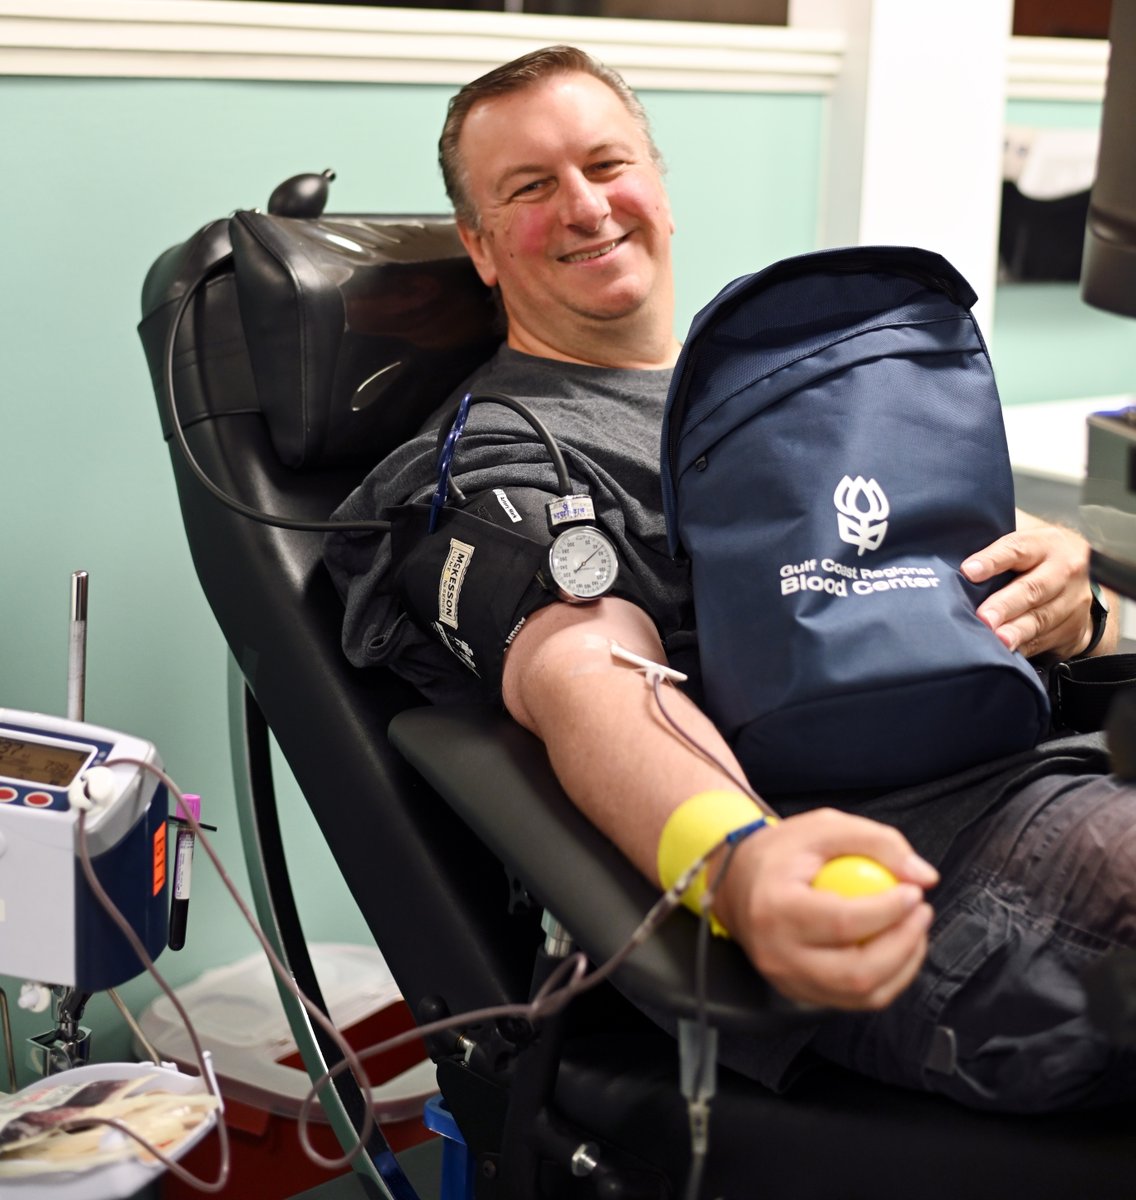 We love to see donors out there carrying the cause! When you donate blood throughout May, we will thank you with a limited-edition sling bag. Schedule your appointment today at giveblood.org!